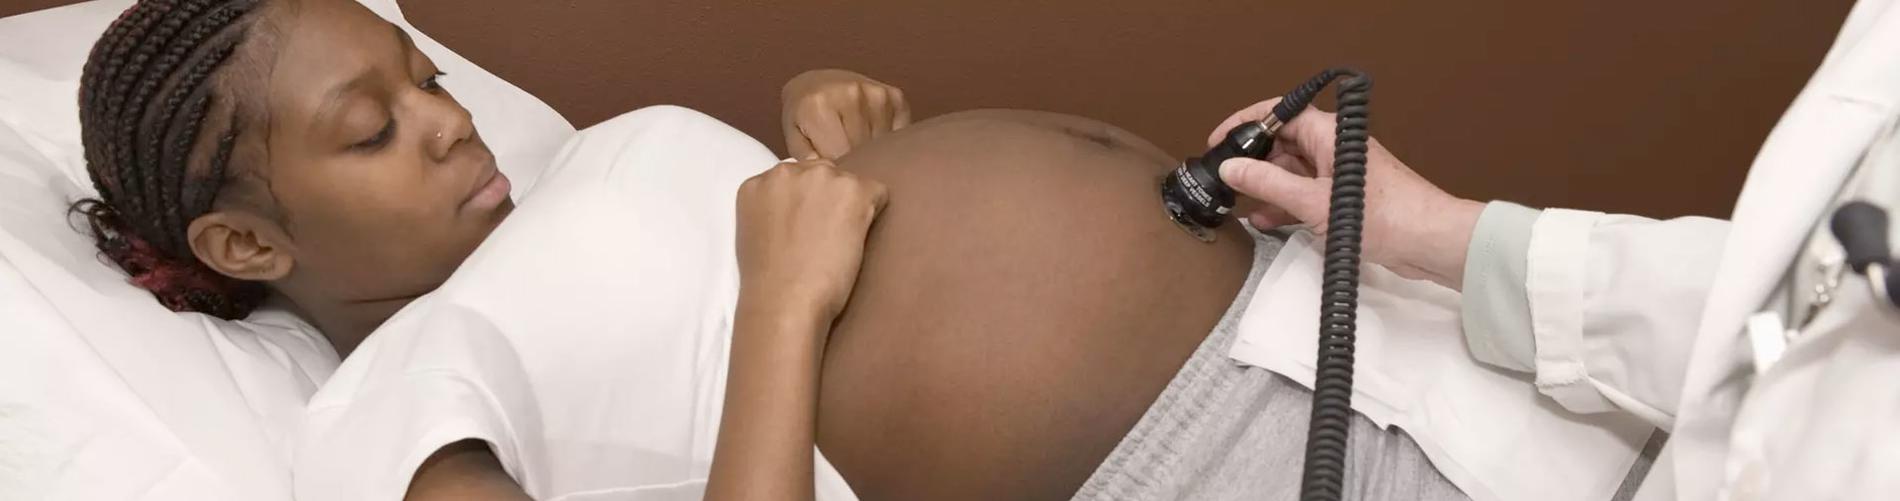 Pregnant mother getting her unborn baby examined